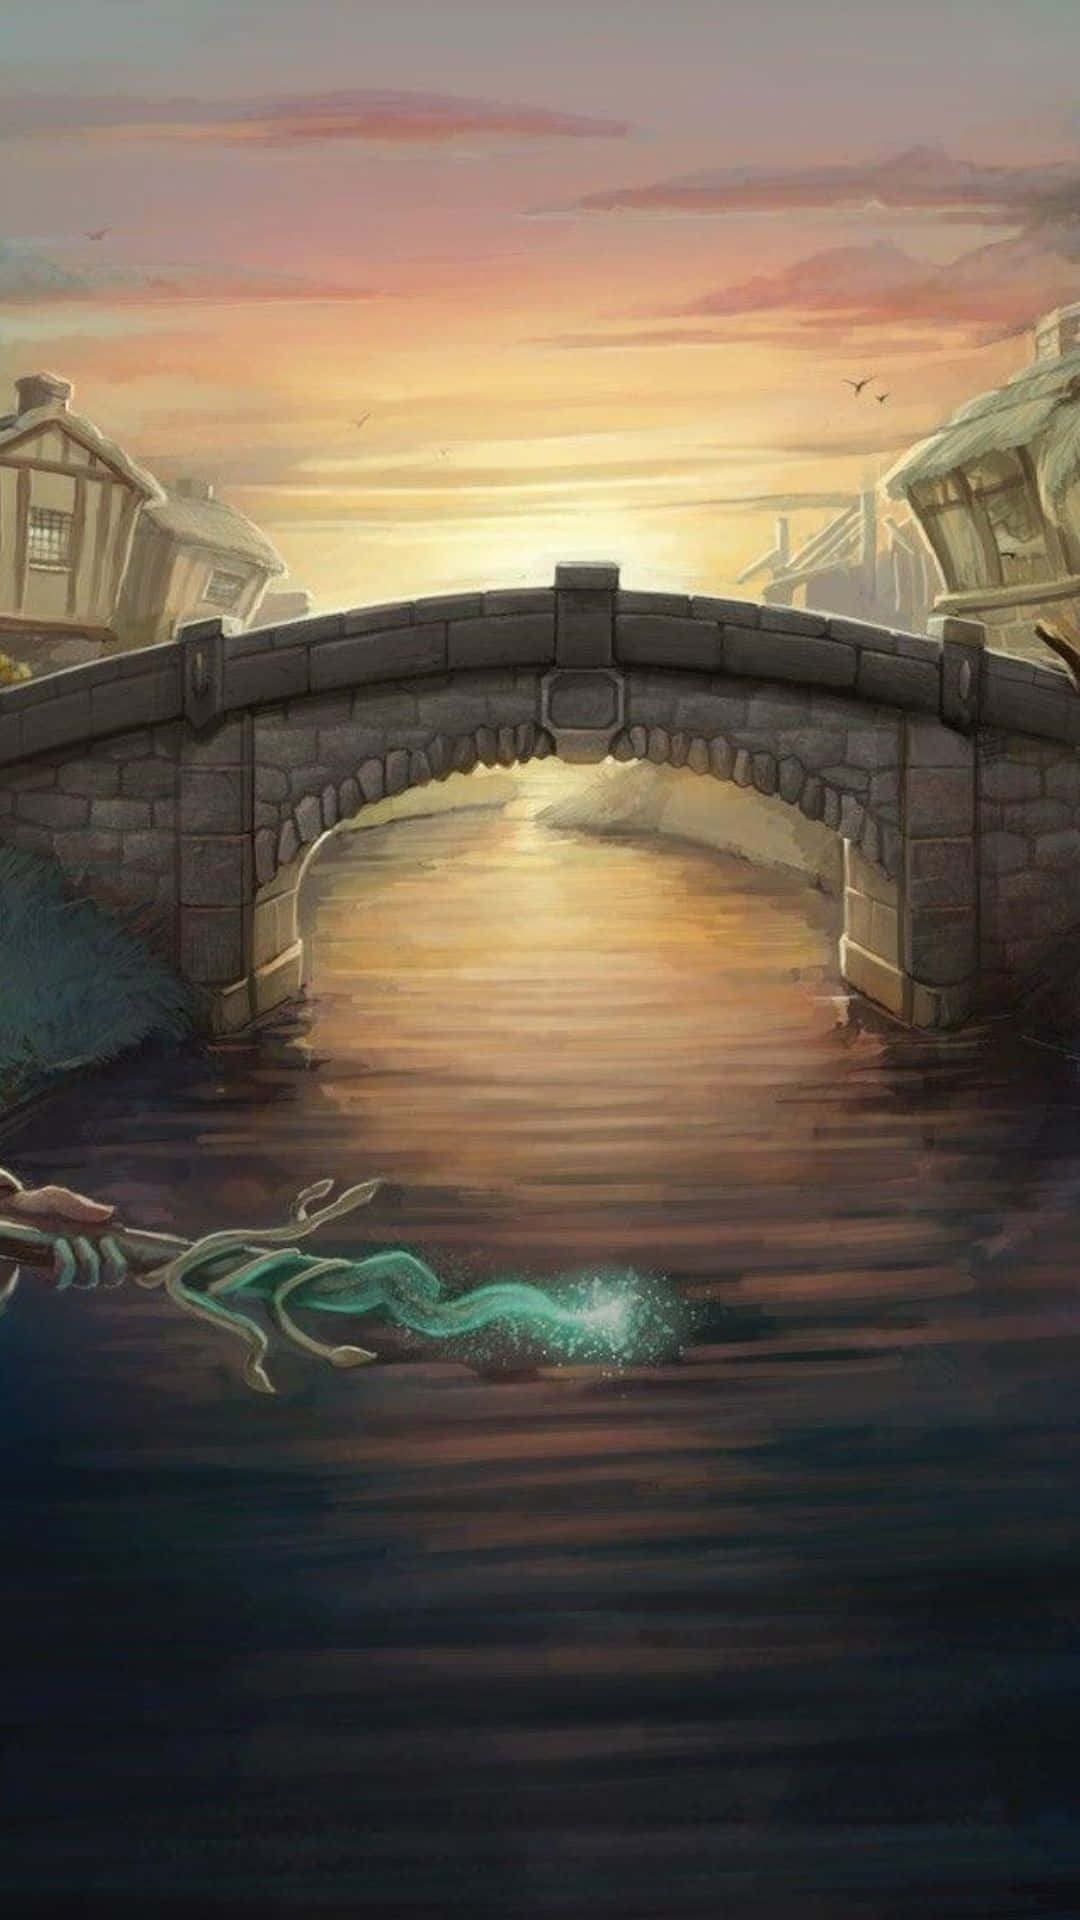 A Painting Of A Bridge Over A River